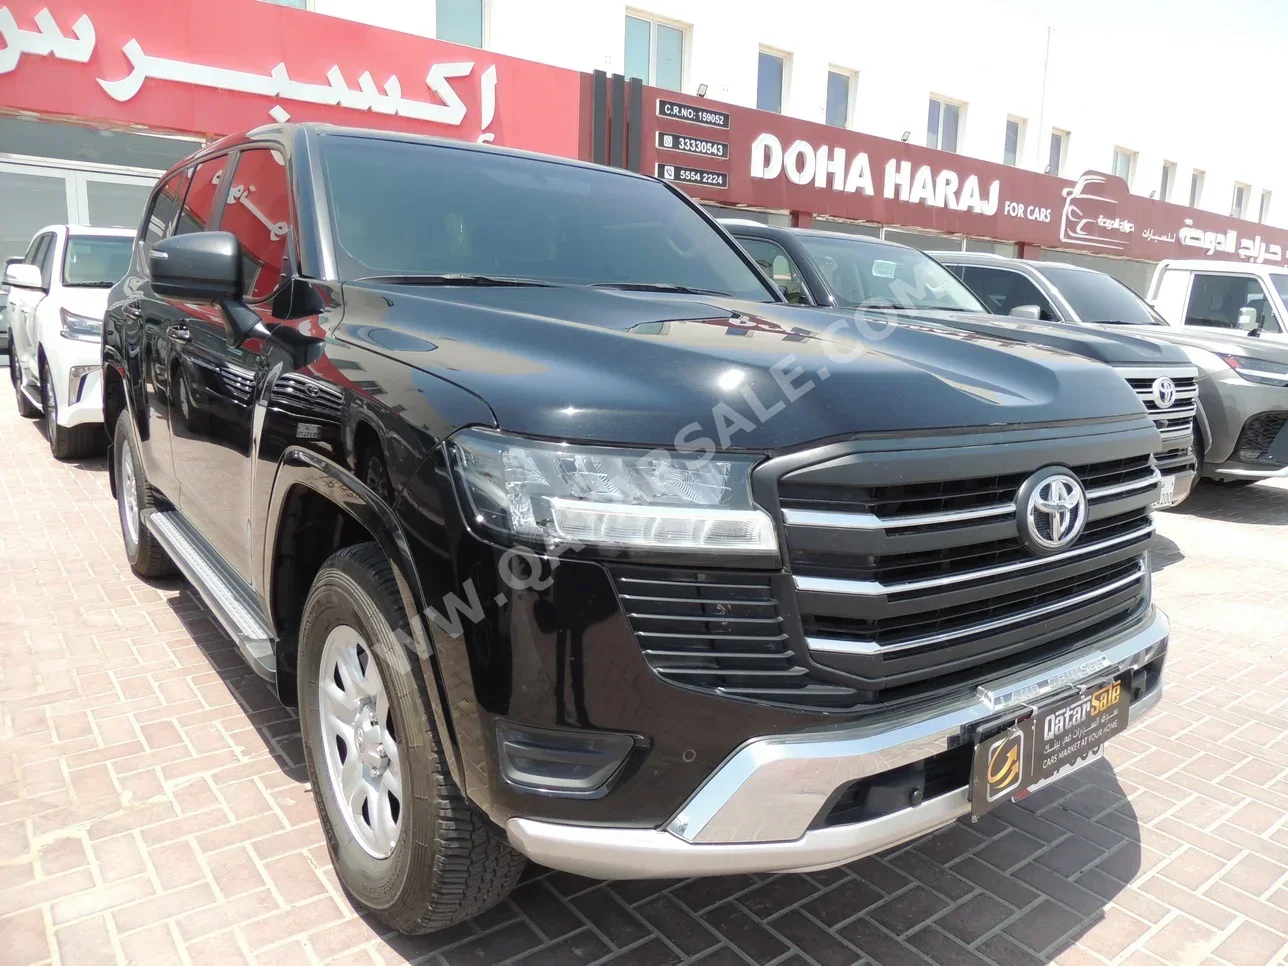 Toyota  Land Cruiser  G  2023  Automatic  67,000 Km  6 Cylinder  Four Wheel Drive (4WD)  SUV  Black  With Warranty